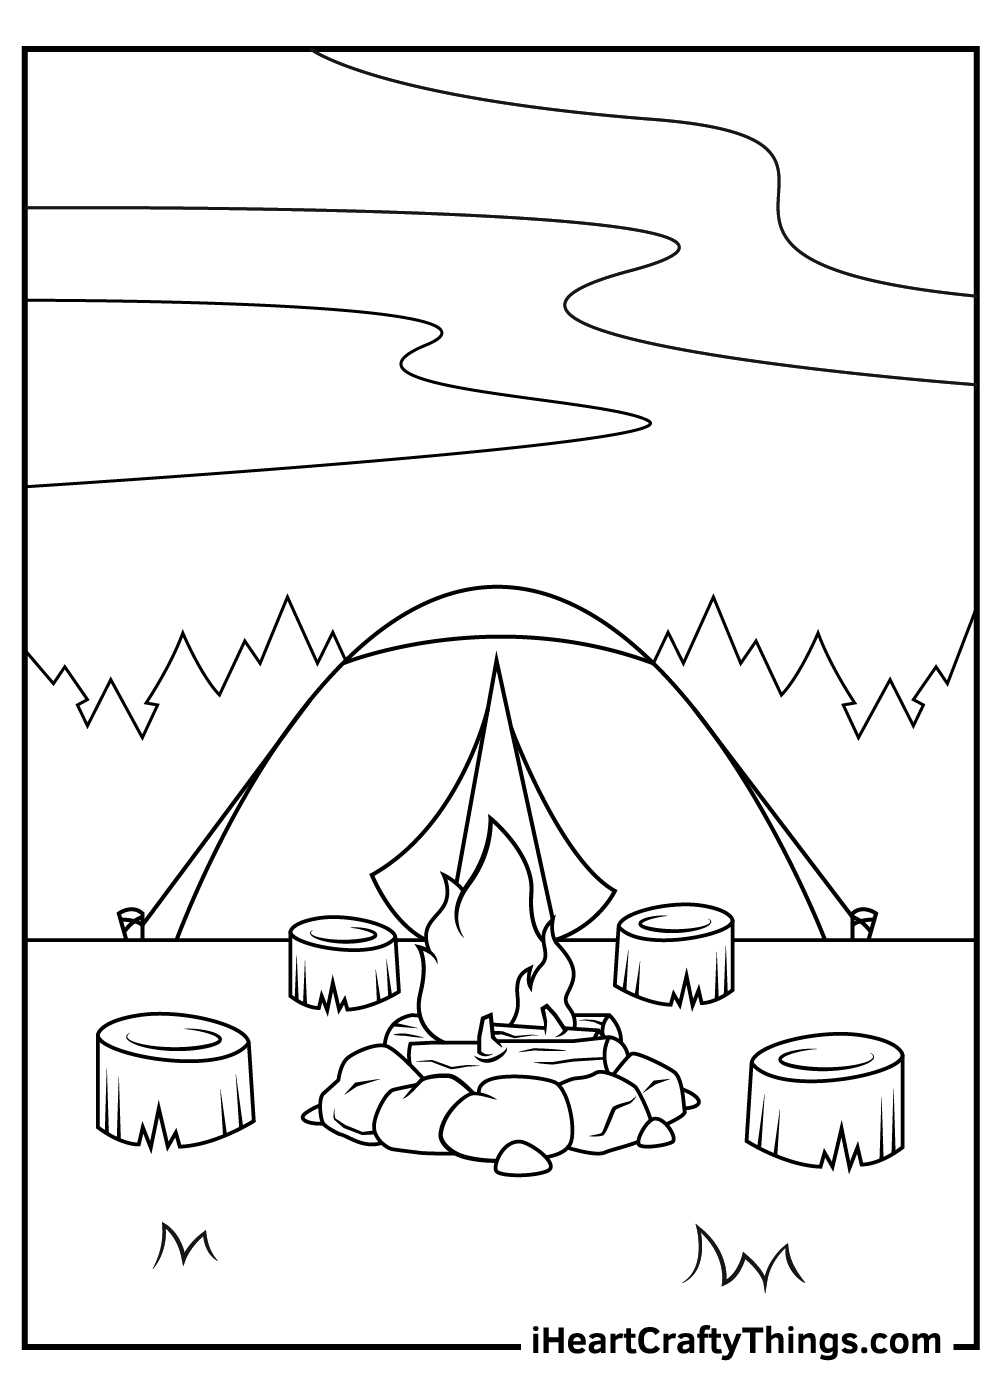 Camping coloring pages free printables